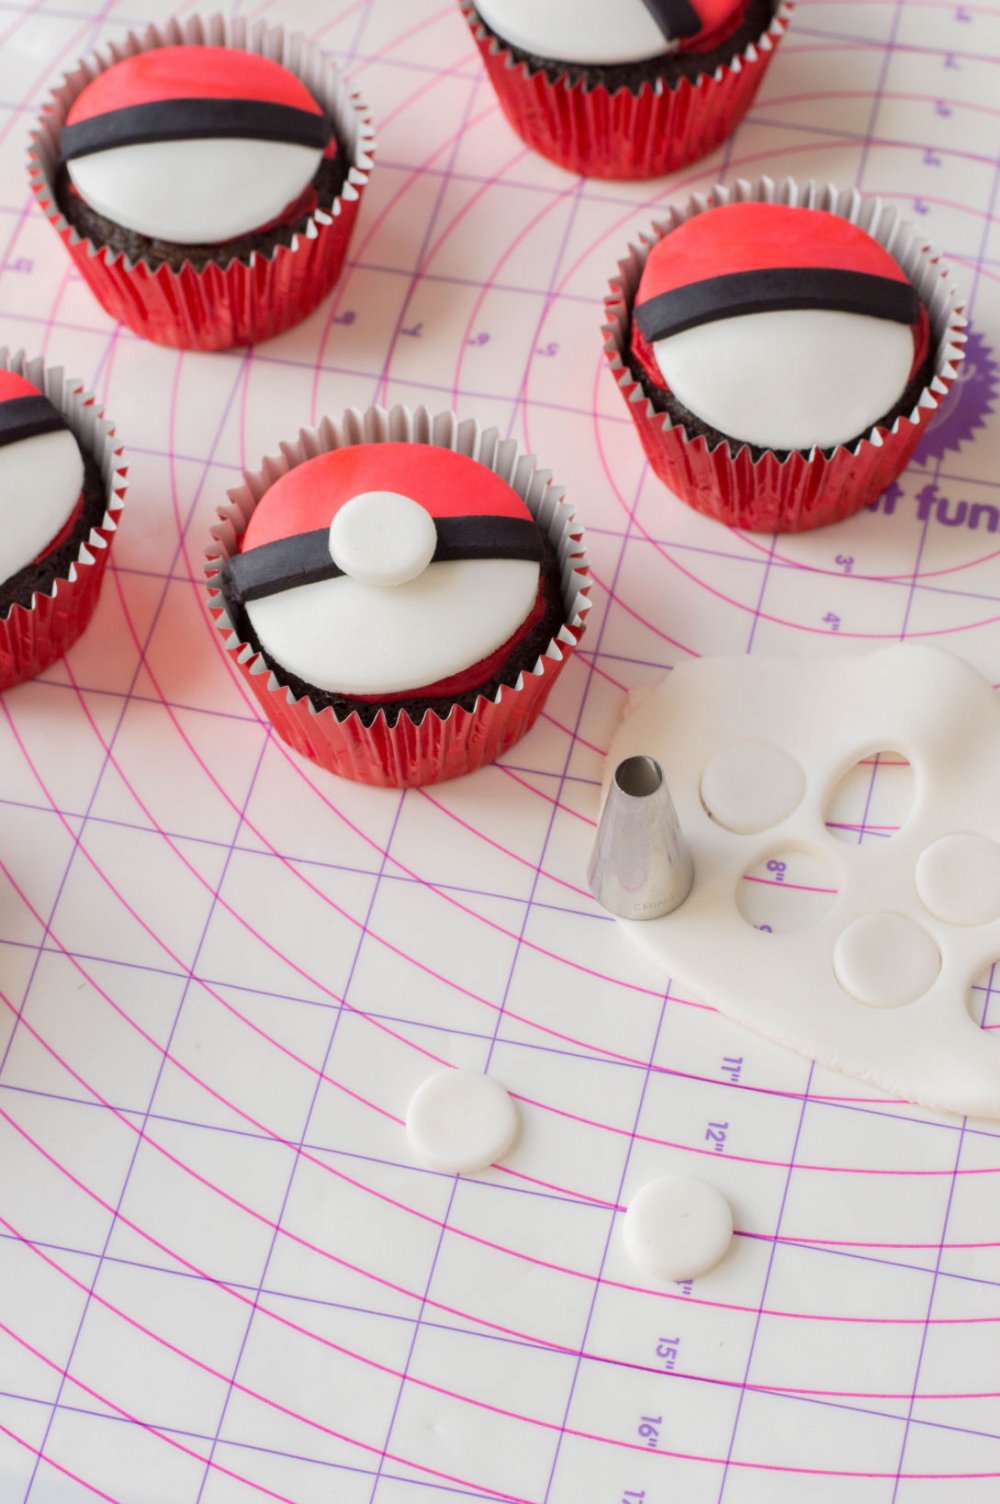 Adding the finishing touch to pokemon cupcakes